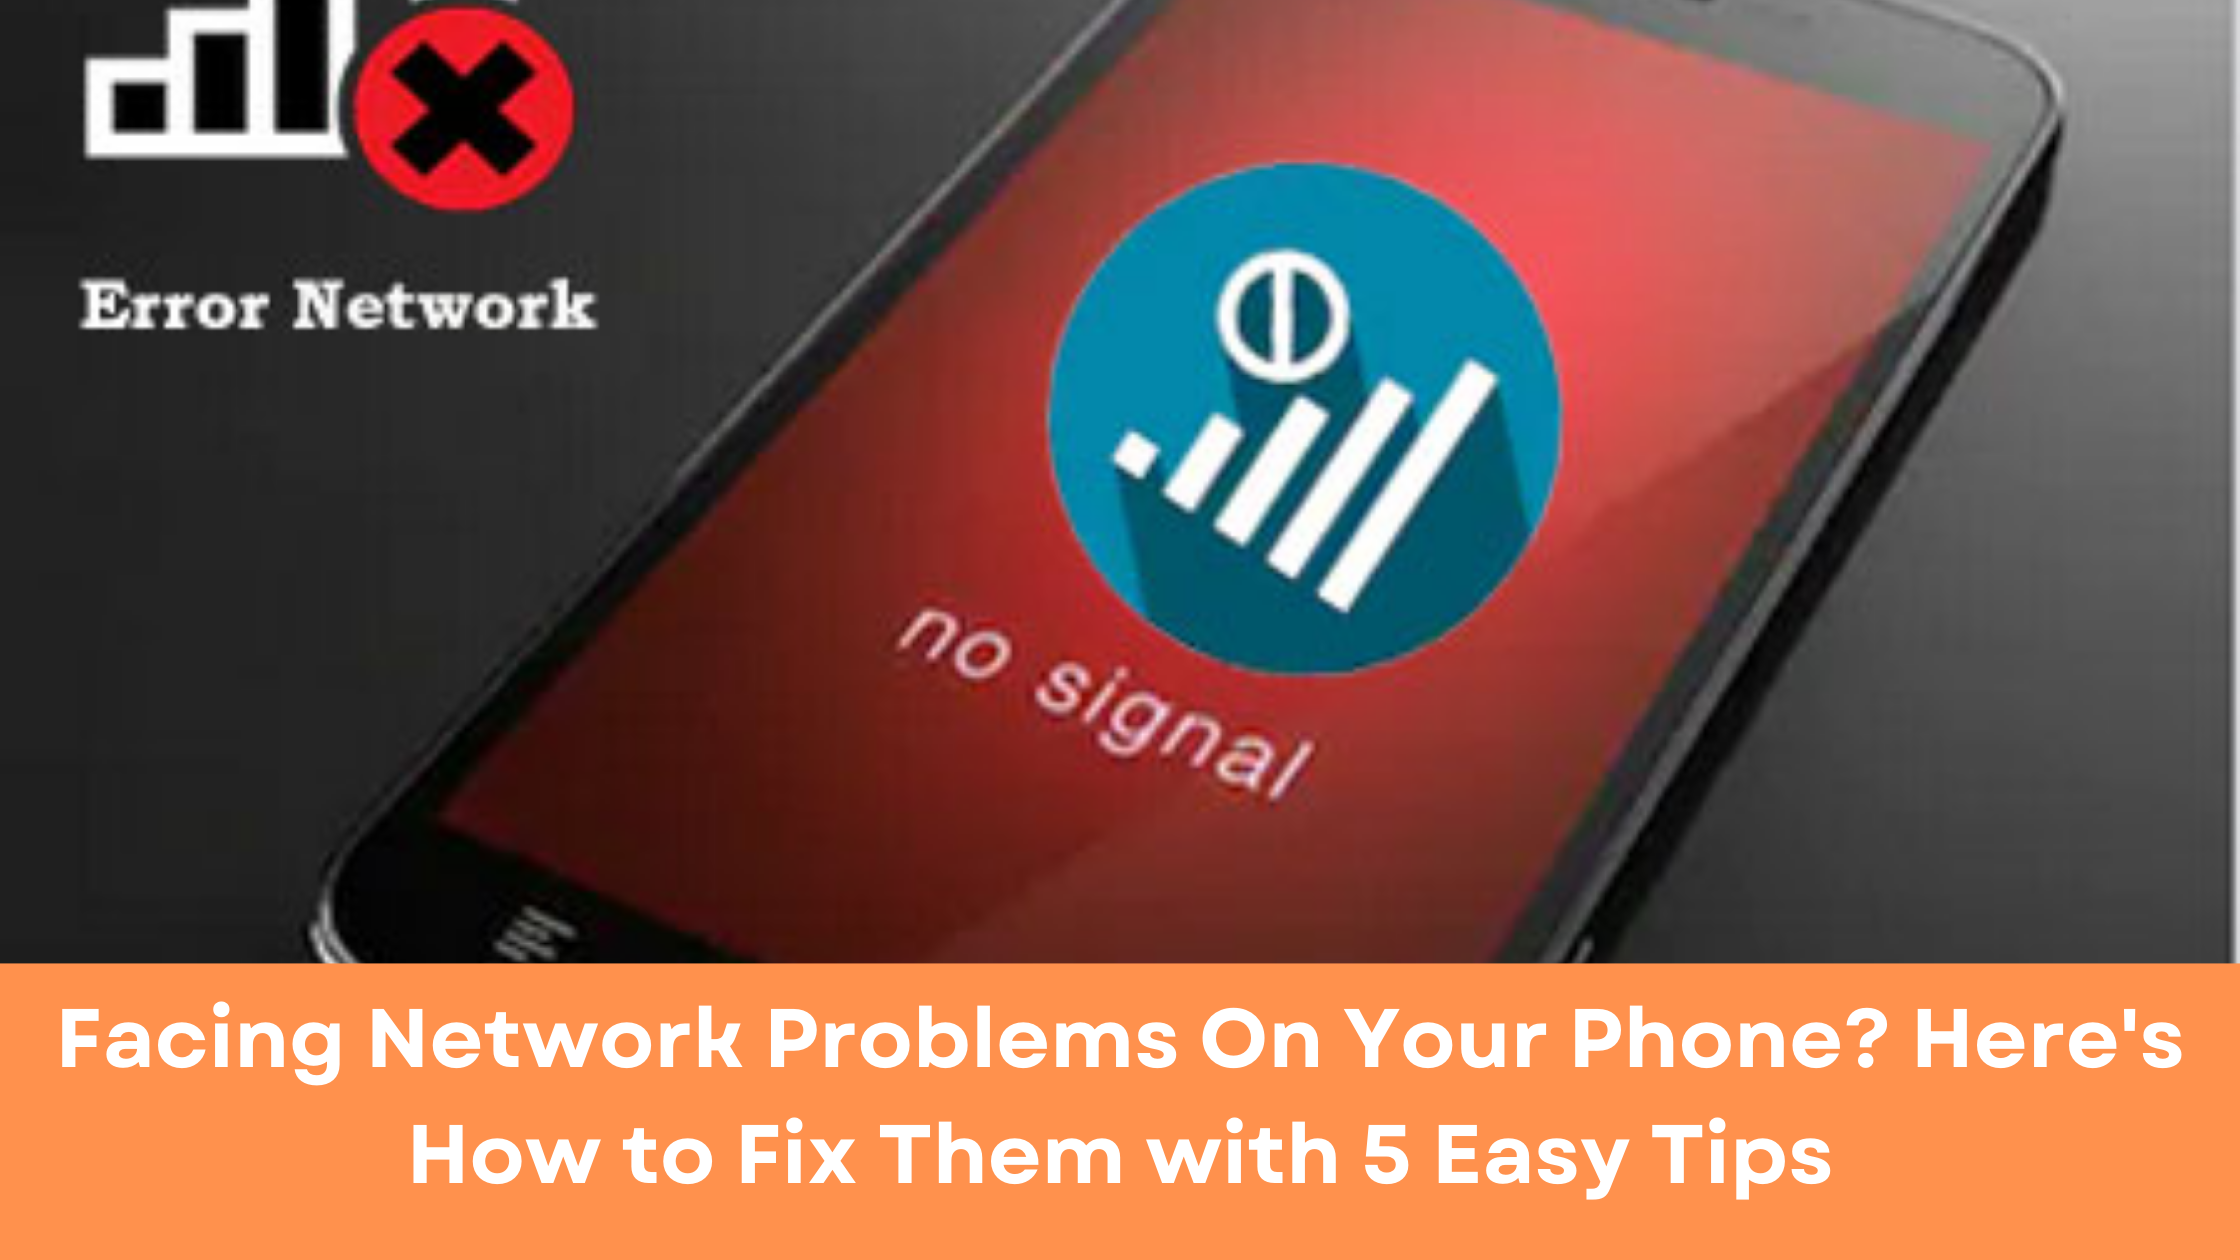 Facing Network Problems On Your Phone? Here's How to Fix Them with 5 Easy Tips